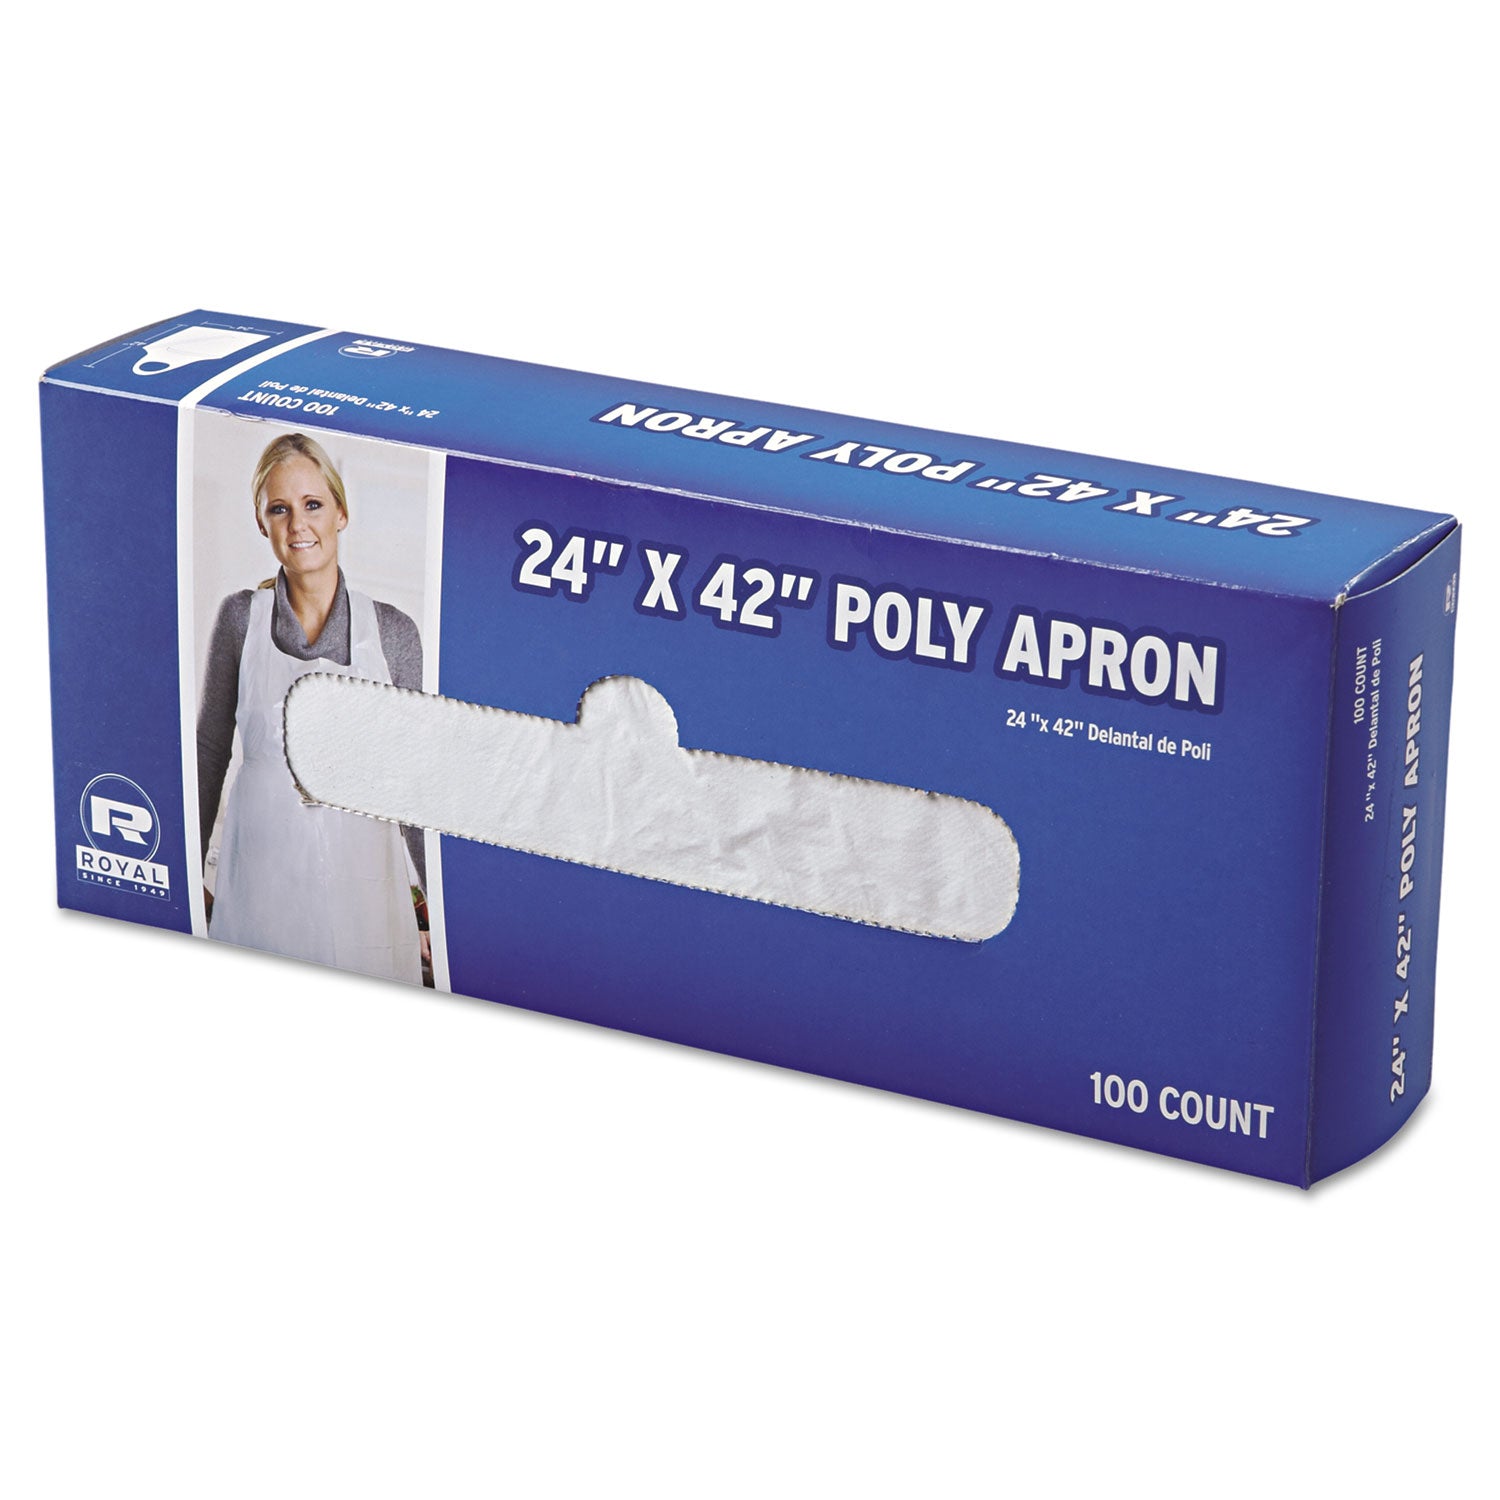 Poly Apron, 24 x 42, One Size Fits All, White, 100/Pack, 10 Packs/Carton - 